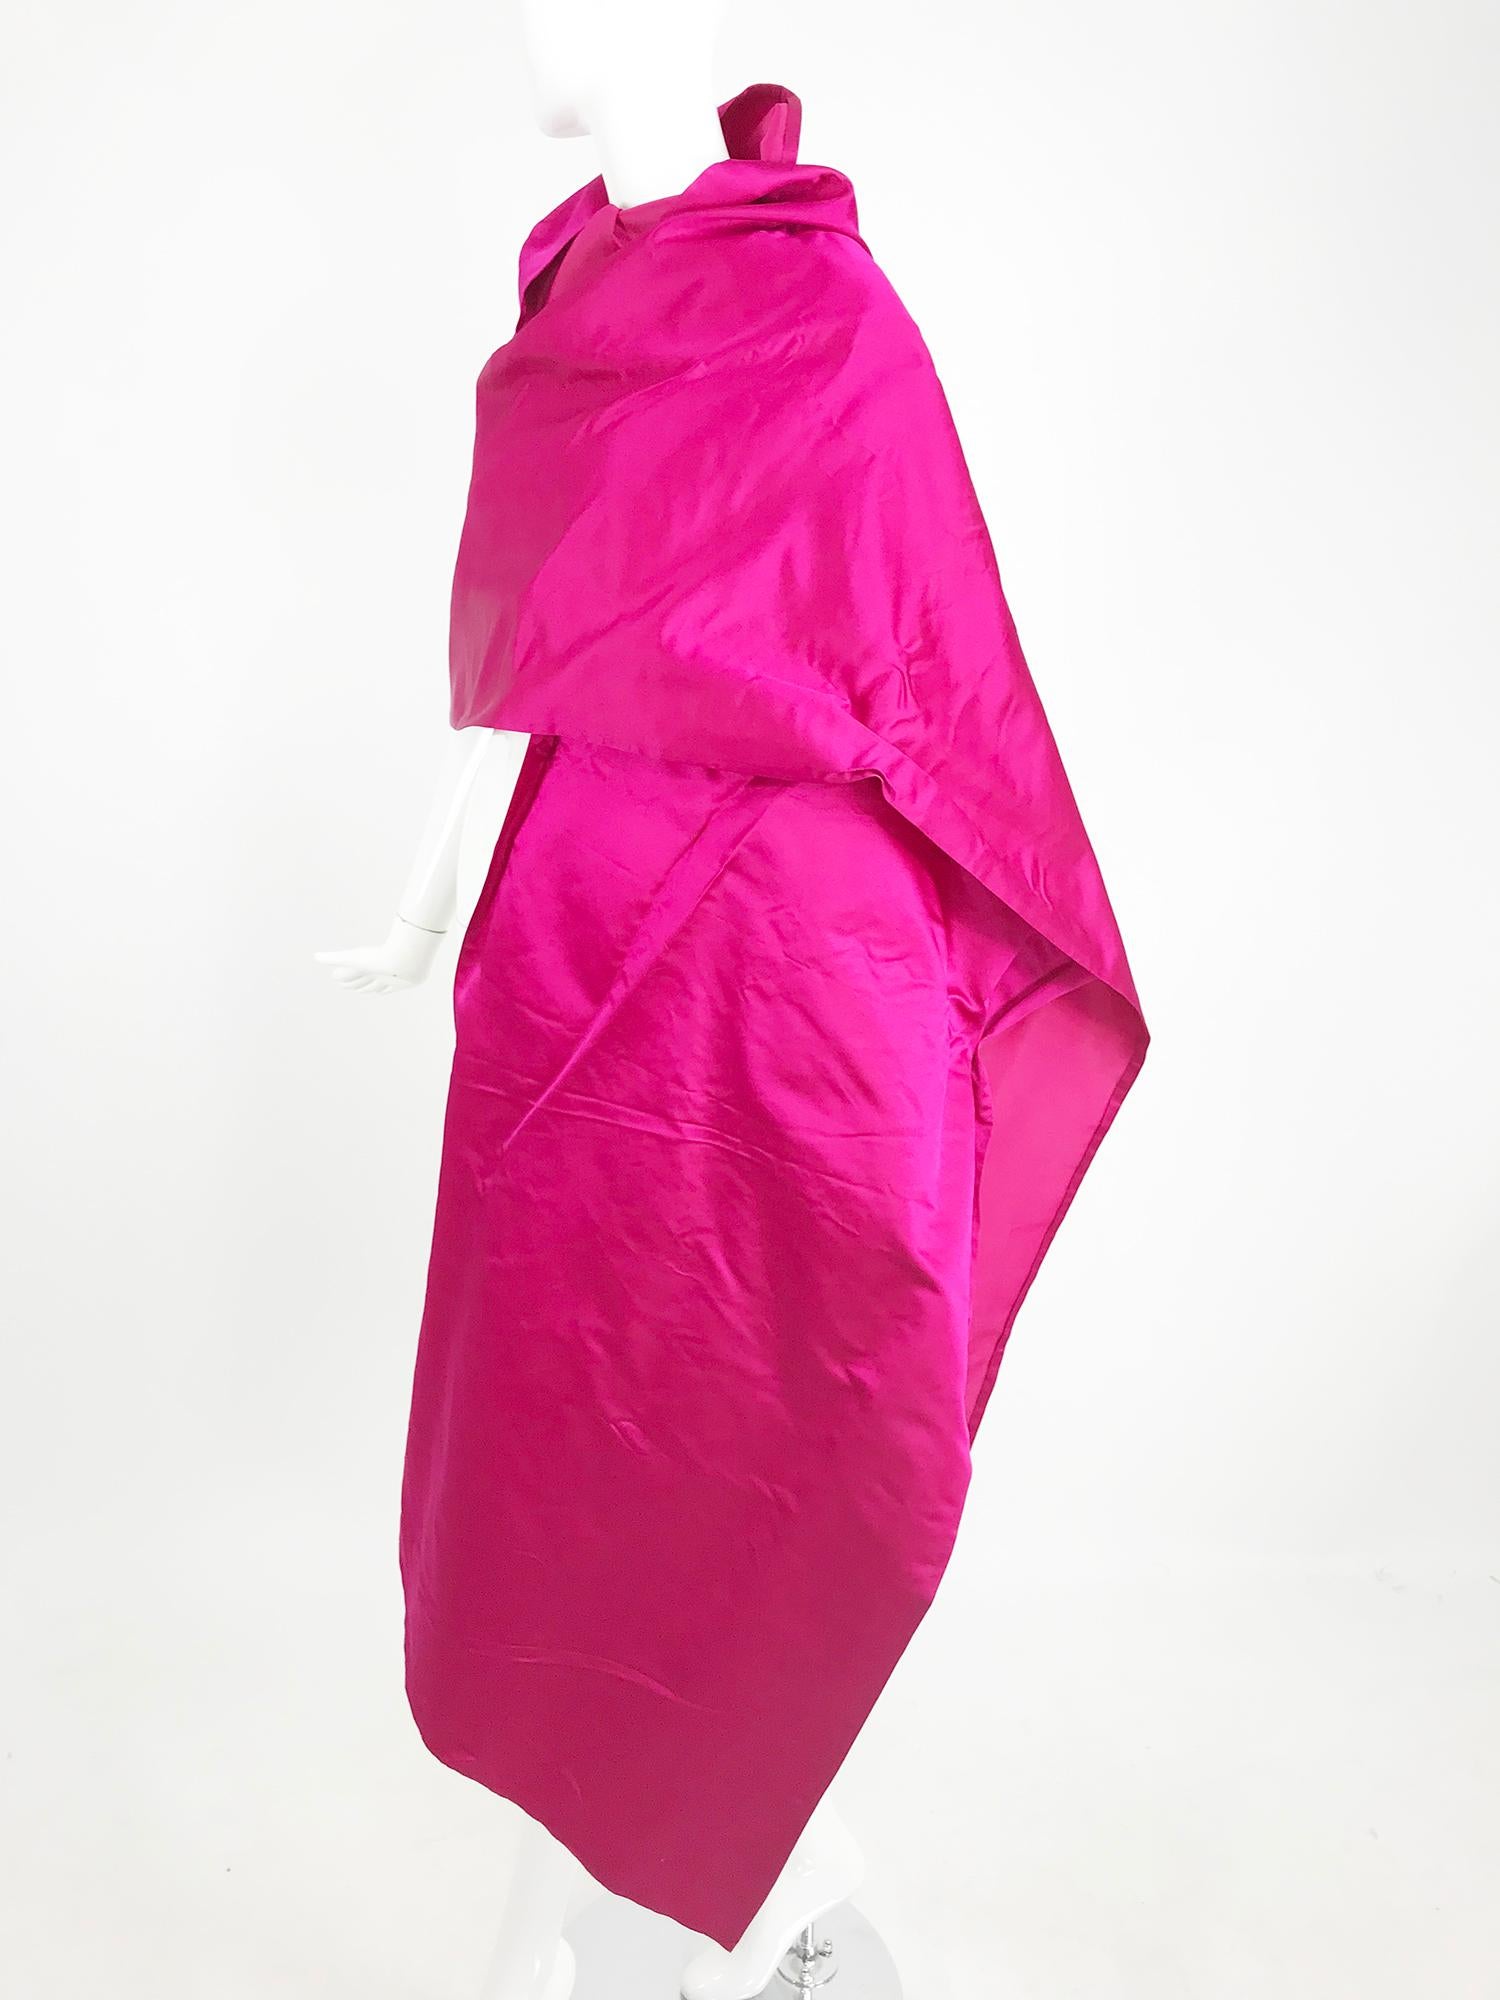 Bill Bass Fuchsia Silk Satin Evening Wrap from the 1970s. Gorgeous and large evening wrap of lustrous silk satin in a fuchsia/hot pink shade. The perfect addition to any big night gown. This has the original tag and is unworn, there is however a